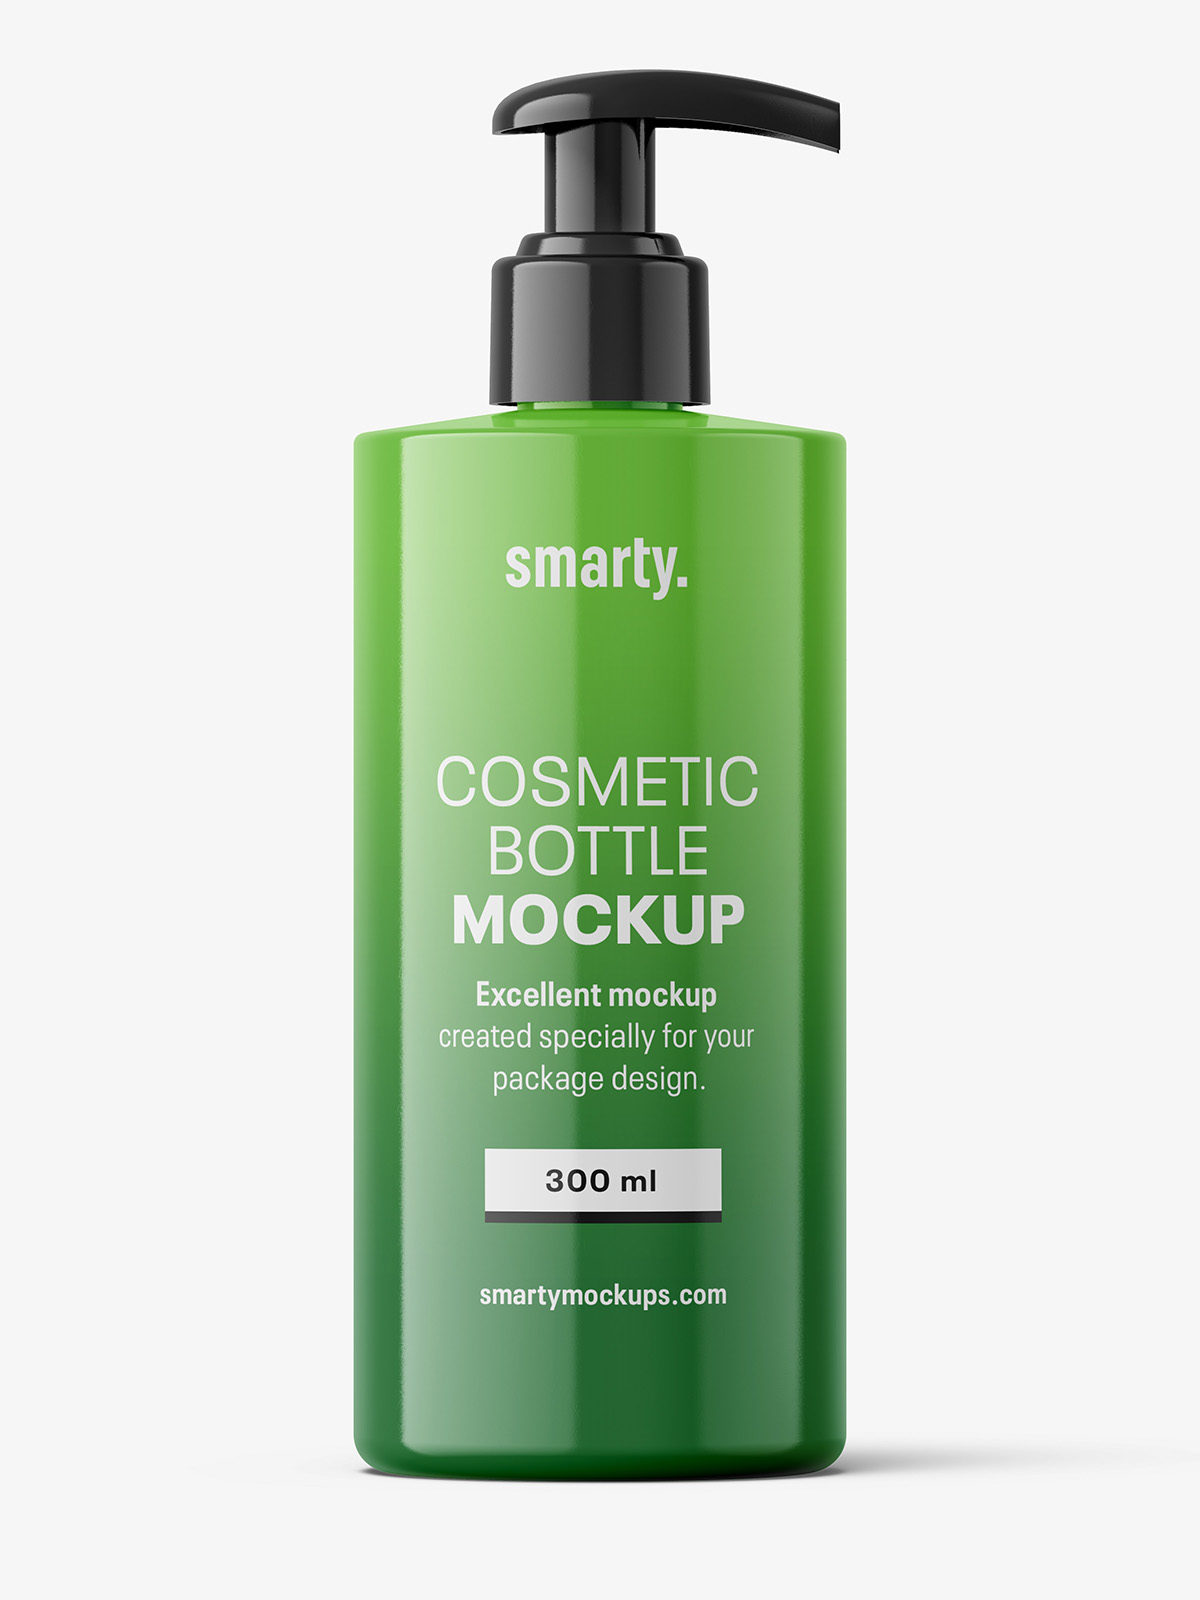 Glossy bottle with pump mockup / 300 ml - Smarty Mockups